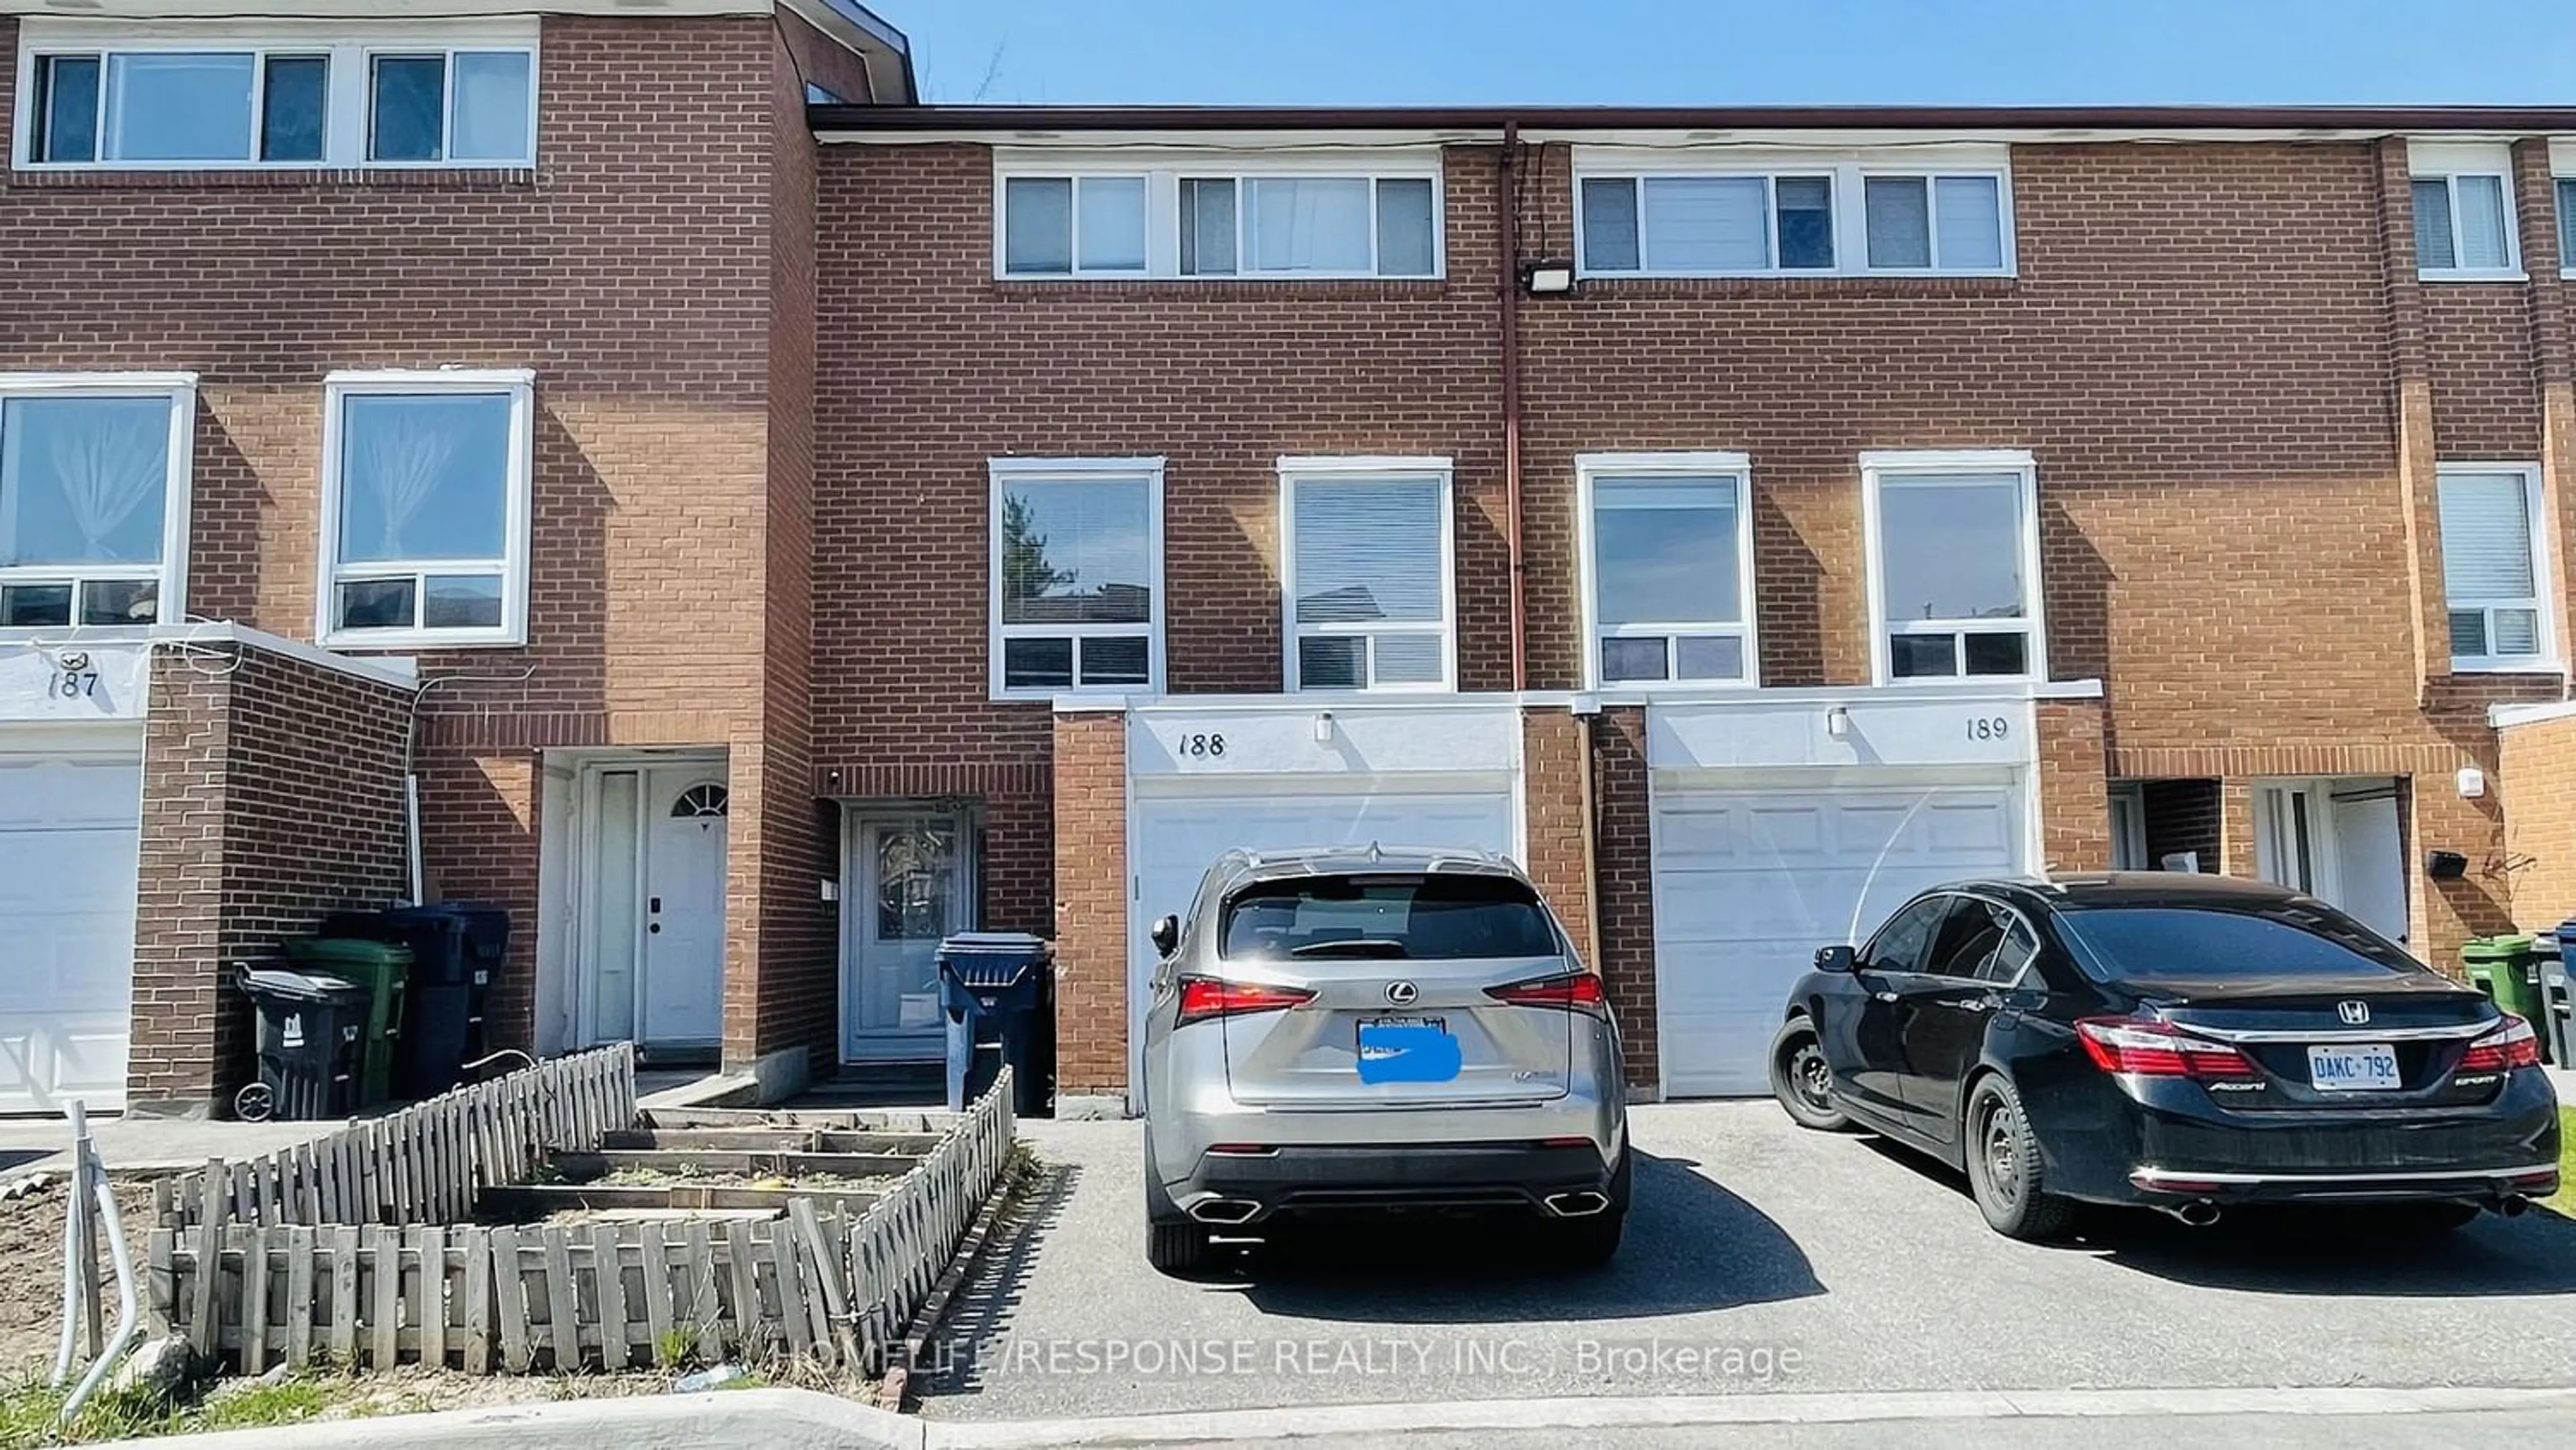 A pic from exterior of the house or condo for 6448 Finch Ave #188, Toronto Ontario M9V 1T4